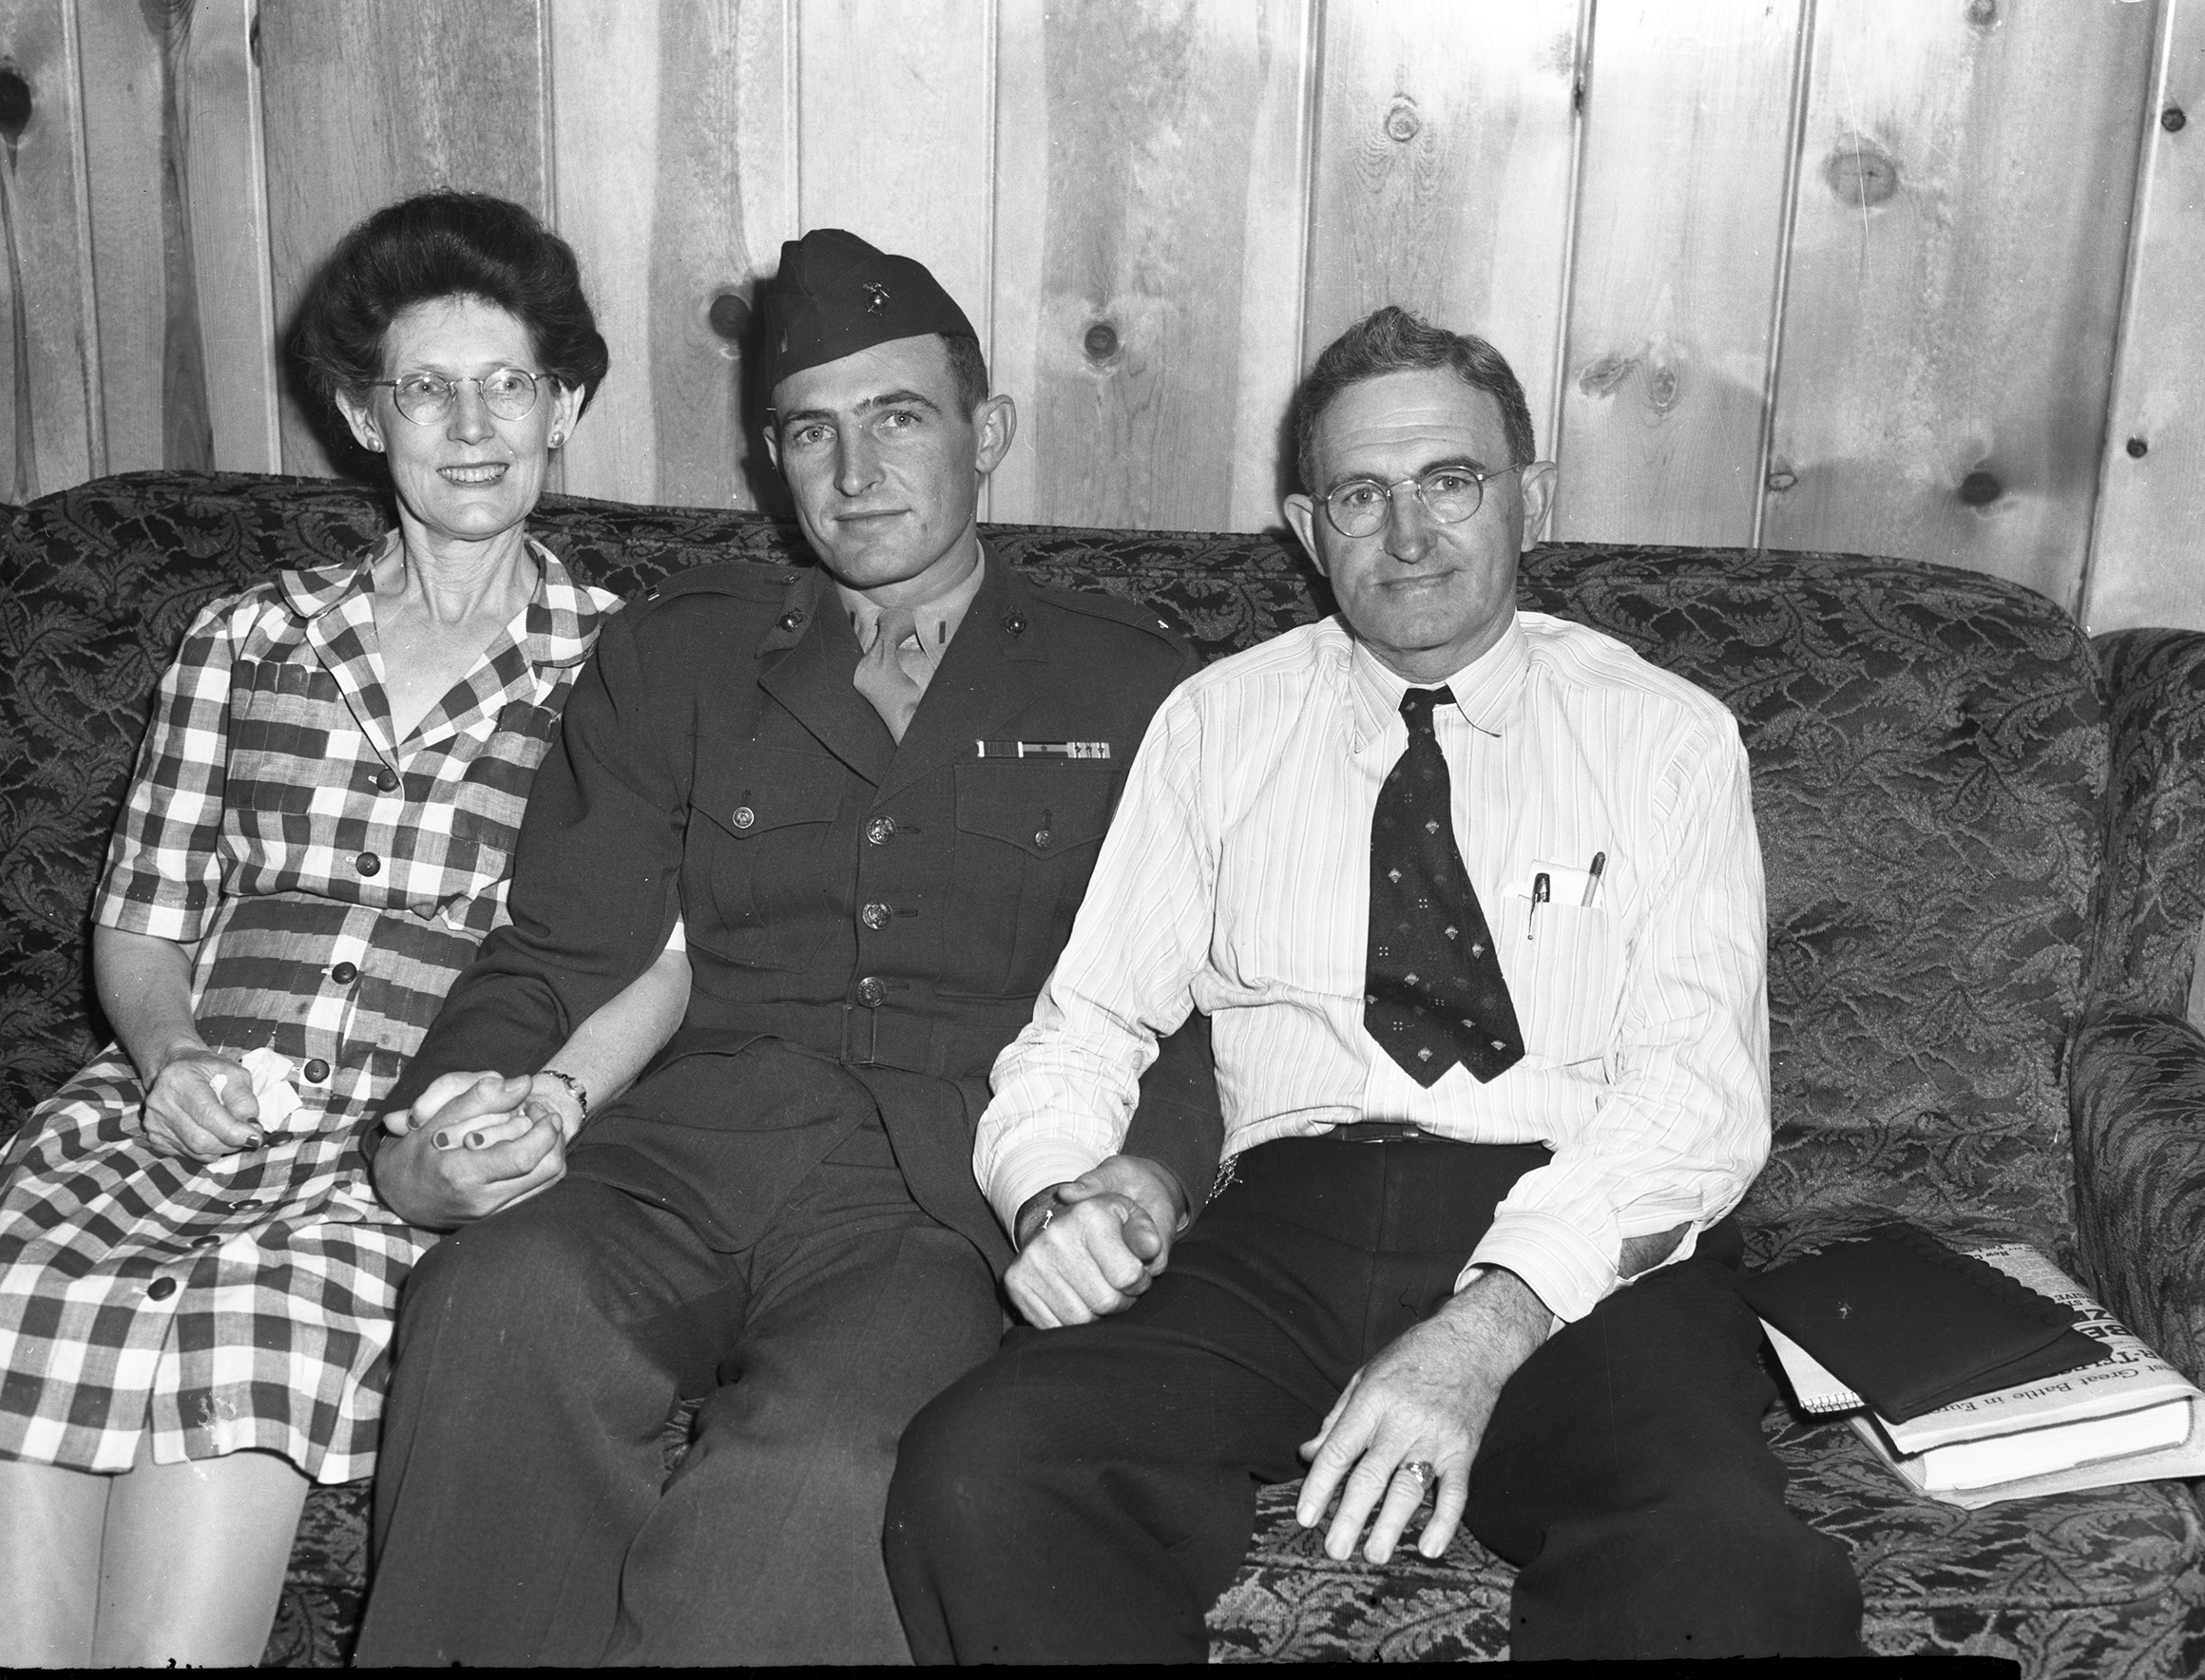 Marine First Lieutenant Robert Boydstun with his parents, Mr. and Mrs. J. J. Boydstun. They are sitting on a couch. His mother is in a checker pattern dress, Robert is at the center in uniform, and his father at right is wearking a dress shirt, tie, and trousers. They are holding hands.